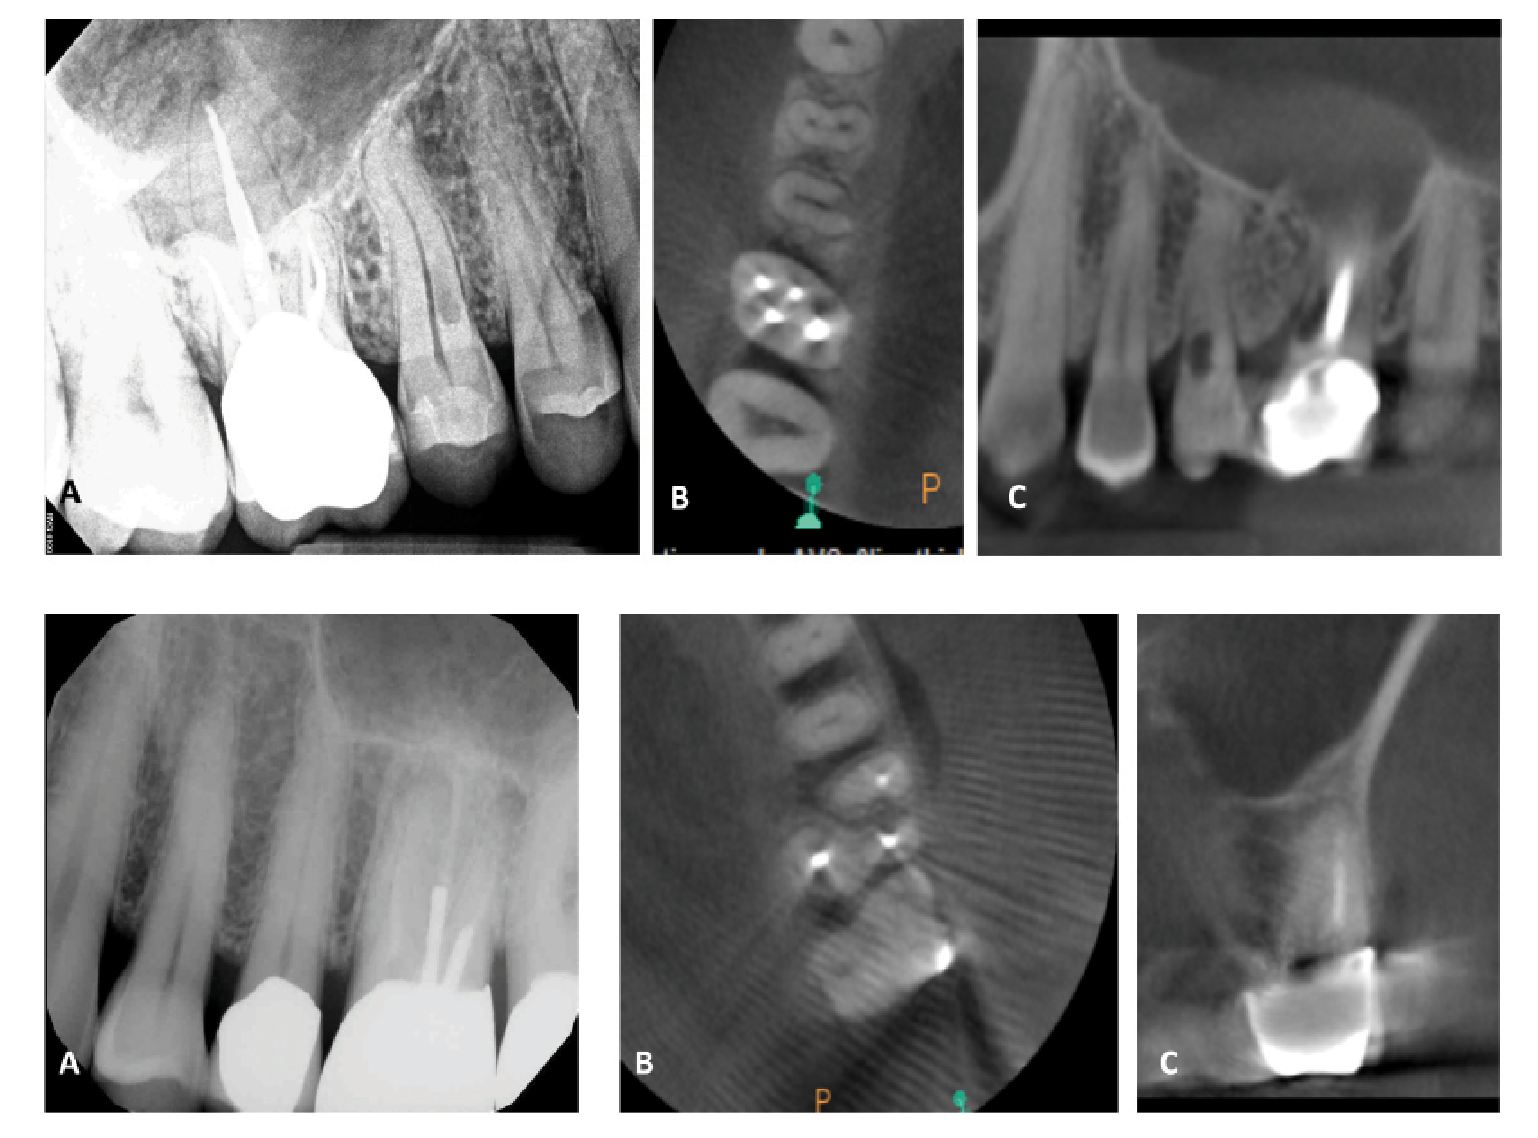 Figure 4 (top). This patient presented for an evaluation of tooth #4, and the periapical radiograph (A) revealed a resorptive defect on the tooth. Further examination with CBCT noted the palatal resorptive defect on the axial (B) and sagittal (C) sections, as well as additional resorptive defects on tooth #3 that would have gone undetected without 3D imaging.Figure 5 (bottom). This patient presented with biting pain associated with a previously treated tooth #14. The periapical radiograph (A) revealed thin root fillings in the tooth as well as the presence of posts. The axial (B) and coronal (C) CBCT sections revealed evidence of untreated anatomy within the mesiobuccal root of the tooth. Based on an understanding of prognostic factors, retreatment was recommended to address the untreated canal.